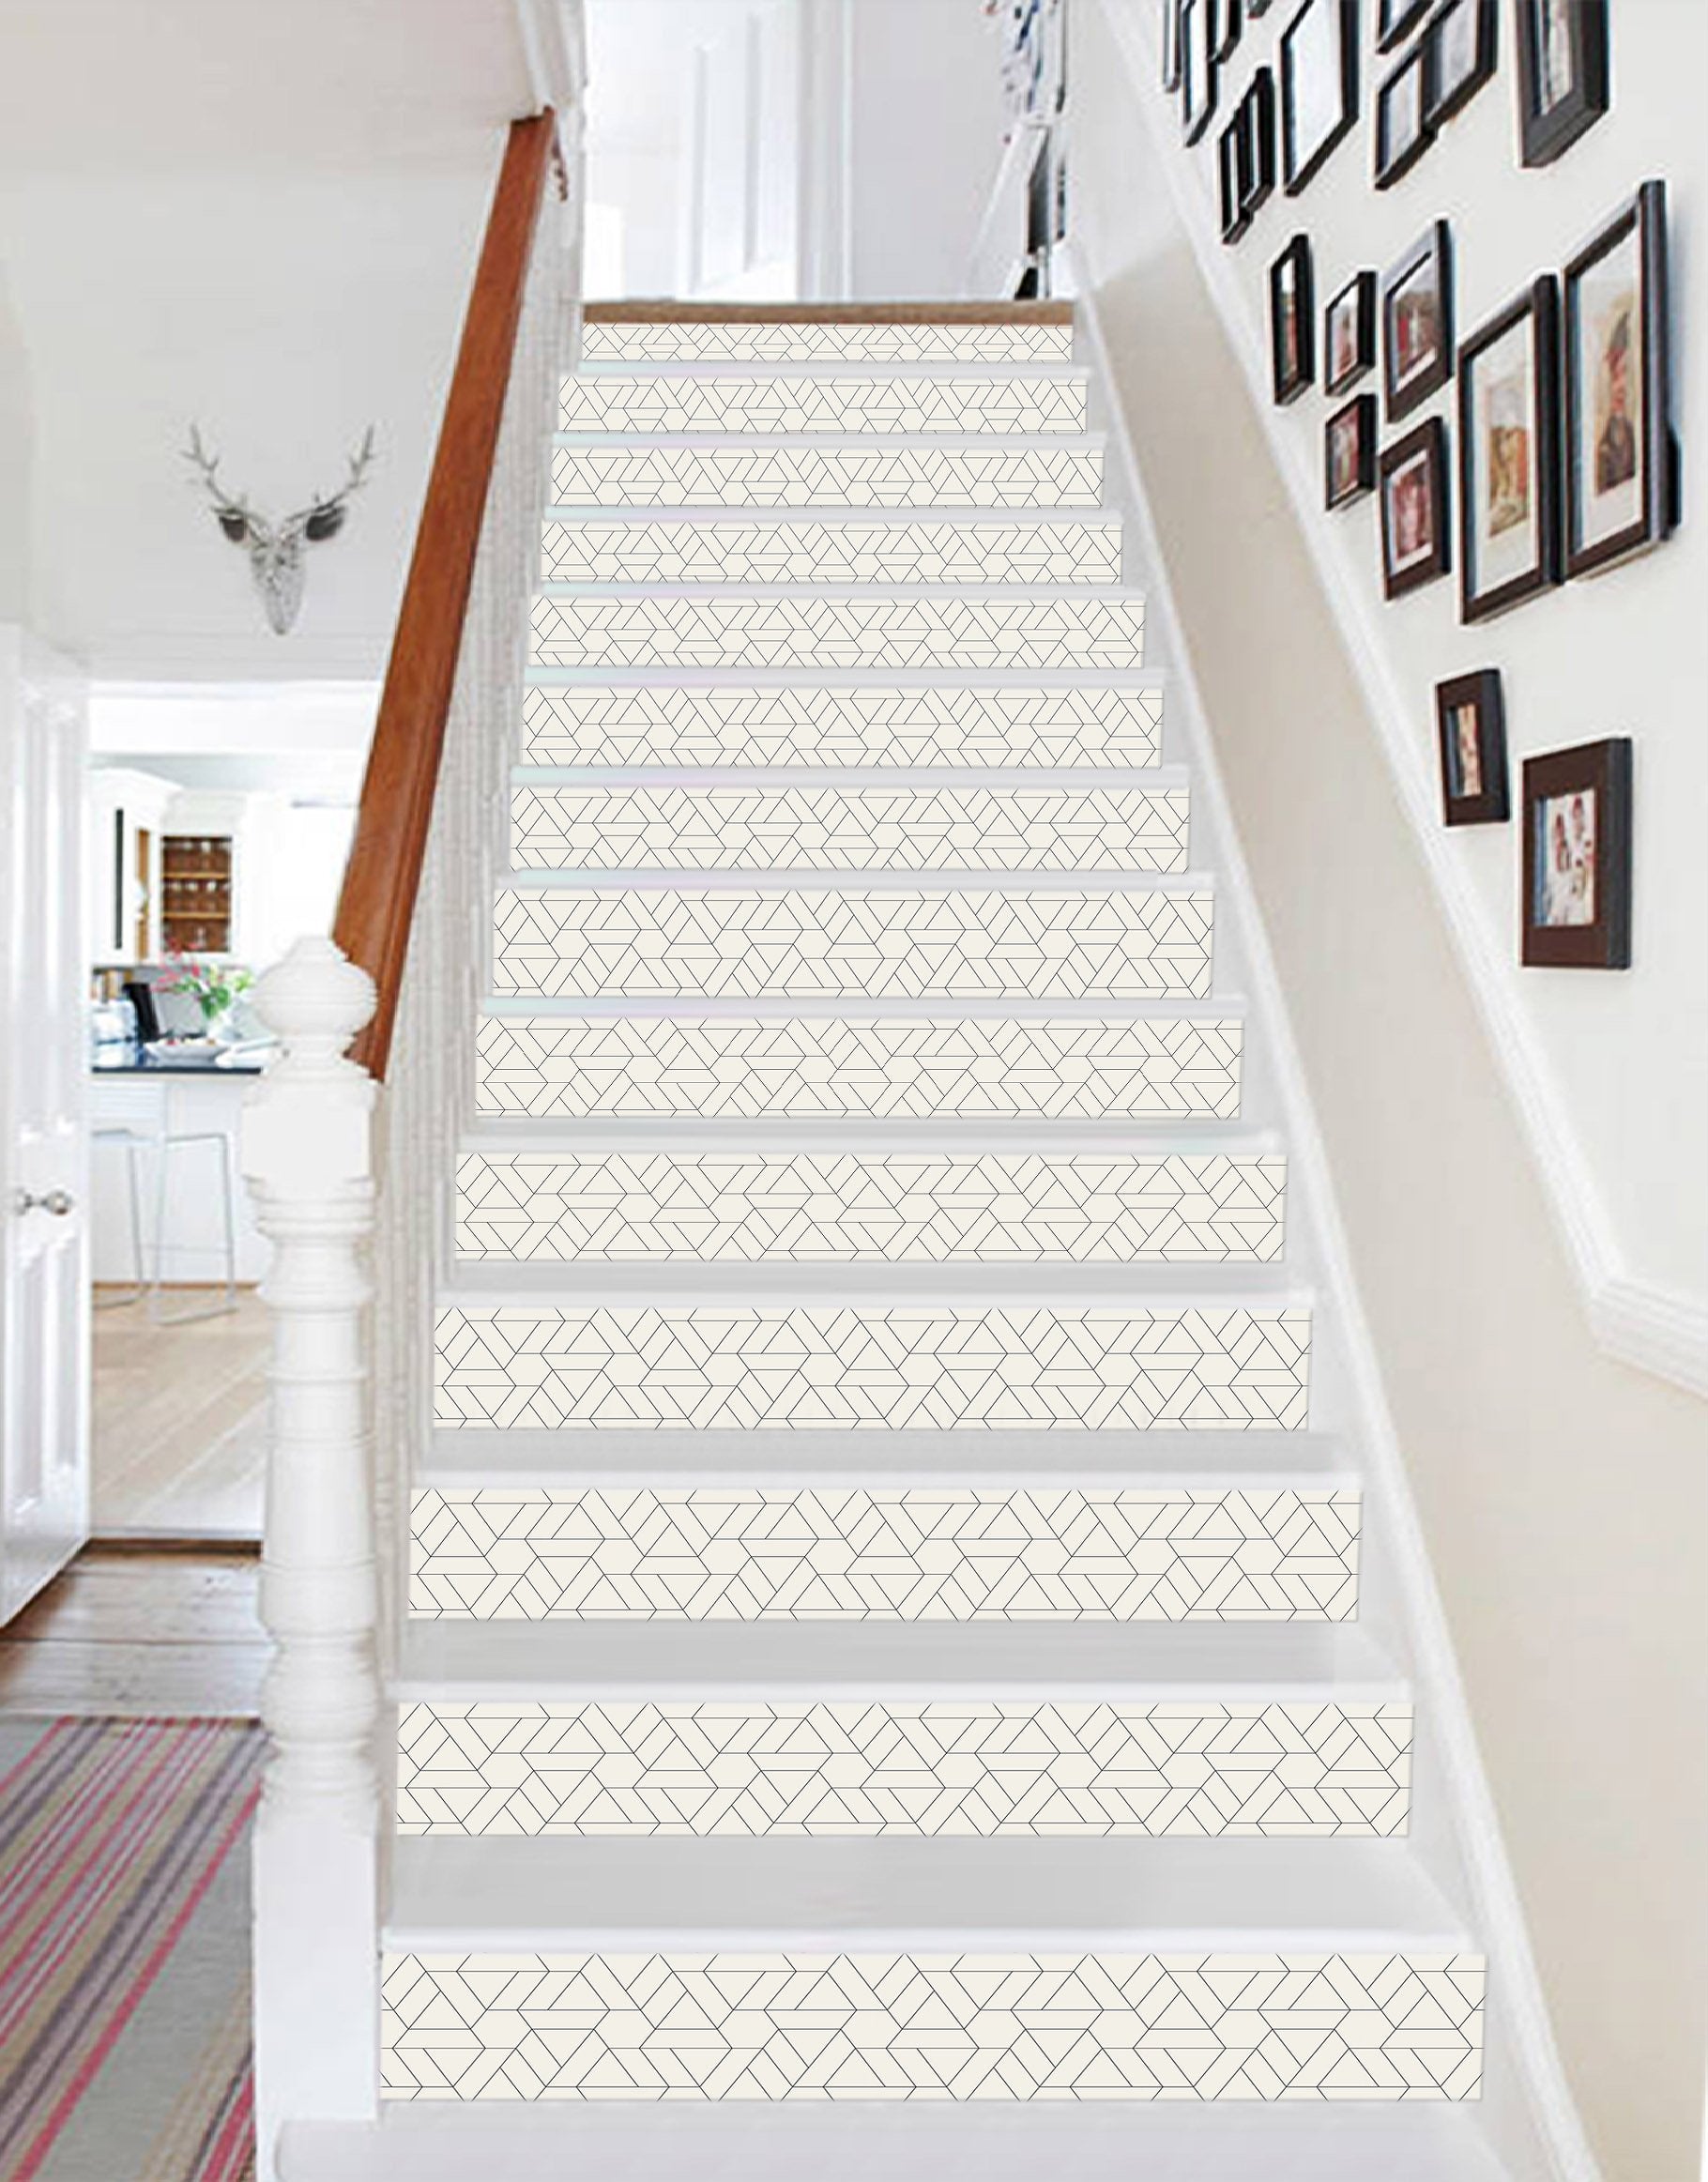 3D Graphic Combination 6874 Marble Tile Texture Stair Risers Wallpaper AJ Wallpaper 